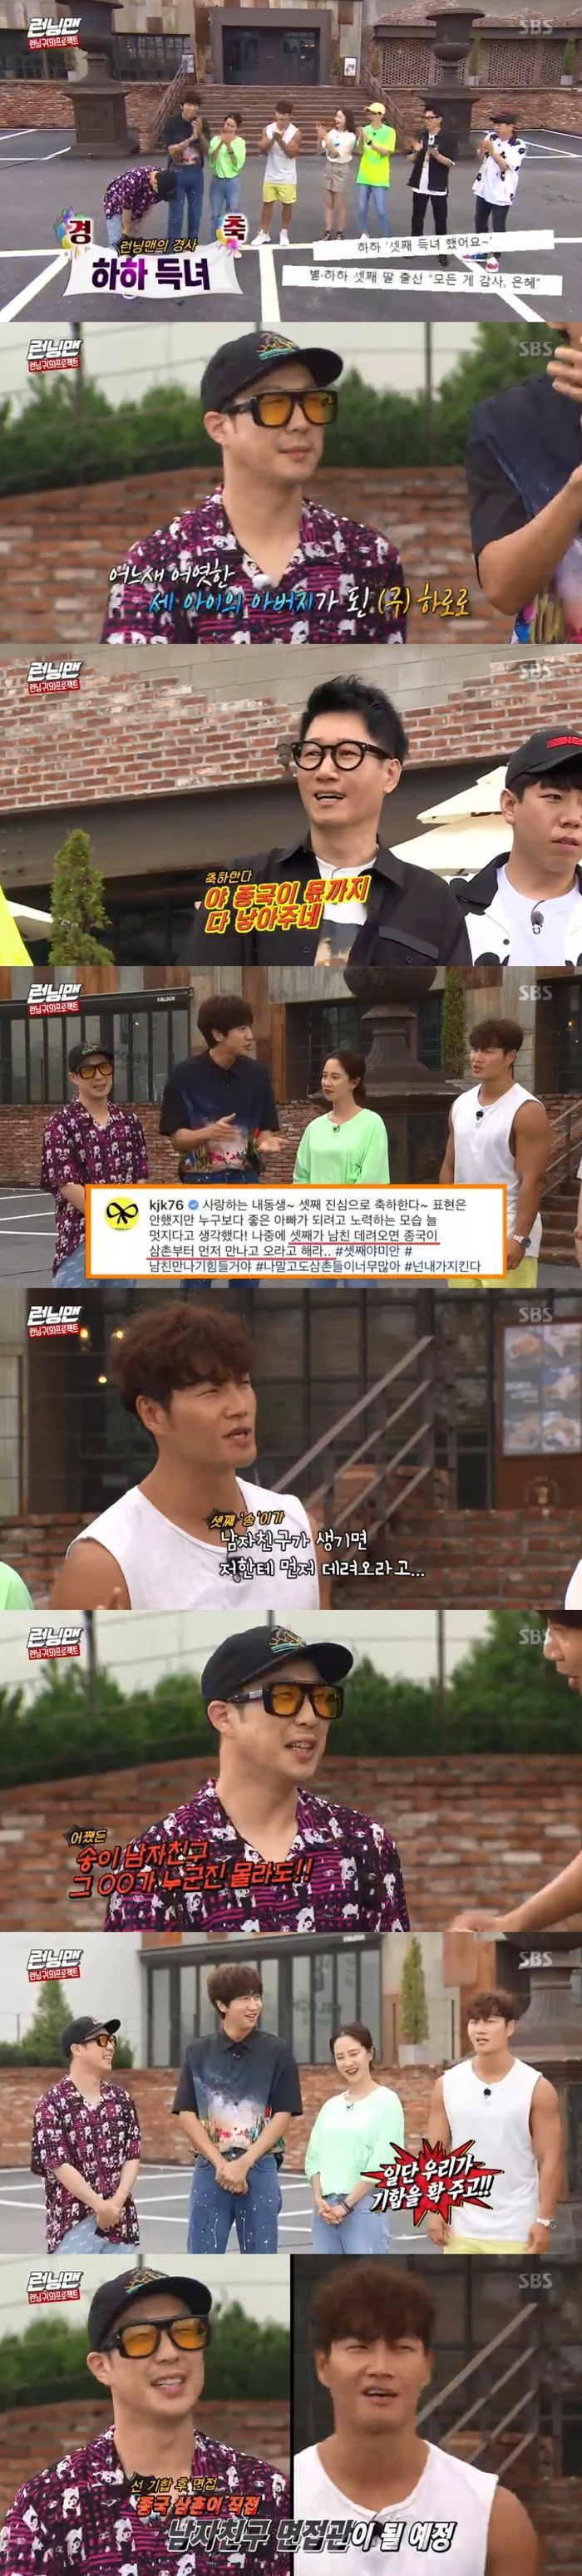 Kim Jong-kook claimed to be a nephew fool.On SBS Running Man broadcasted on the 28th, he boasted the daughter of Running Man members who heard Hahas news of his daughter.On the day of the opening, Running Man members congratulated Haha on the news of Haha.Yoo Jae-seok said, I wanted my daughter so much. He shook his head and Ji Seok-jin also joked, The end gives birth to a share.Kim Jong-kook revealed that he celebrated the news of the third Songy on his personal SNS first.I do not know what boyfriend Song will meet, but he brought me first and asked me to get permission, he said.The Running Man members said, I wonder how old my brother will be at that time. Then Haha replied, At that time, my brother will win.Haha also laughed at the appearance of his daughter, I do not know who the boyfriend will be.On the other hand, Jang Jin-hee, Song Ji-in, Ohmy Girl Seung-hee and Rossi appeared as guests on the Running Man and started a couple race.